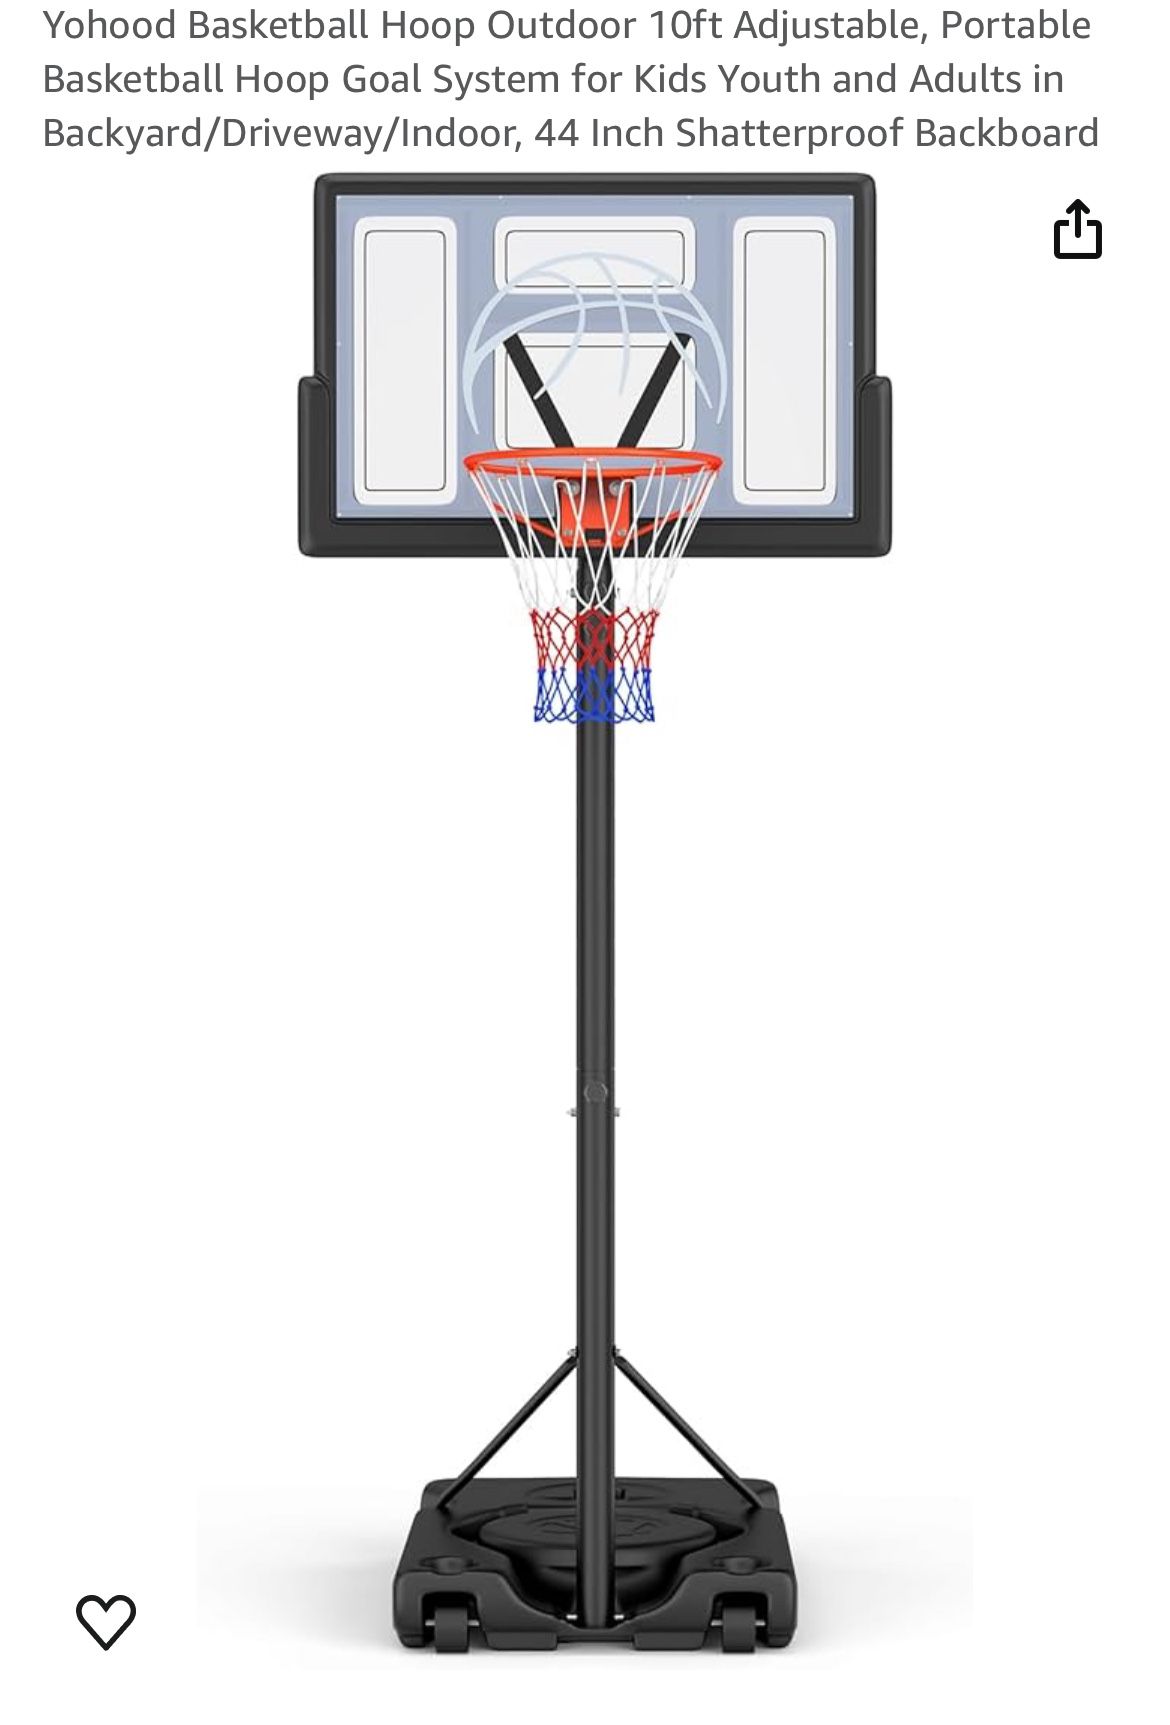 Yohood Basketball Hoop Outdoor 10ft Adjustable, Portable Basketball Hoop Goal System for Kids Youth and Adults in Backyard/Driveway/Indoor, 44 Inch Sh